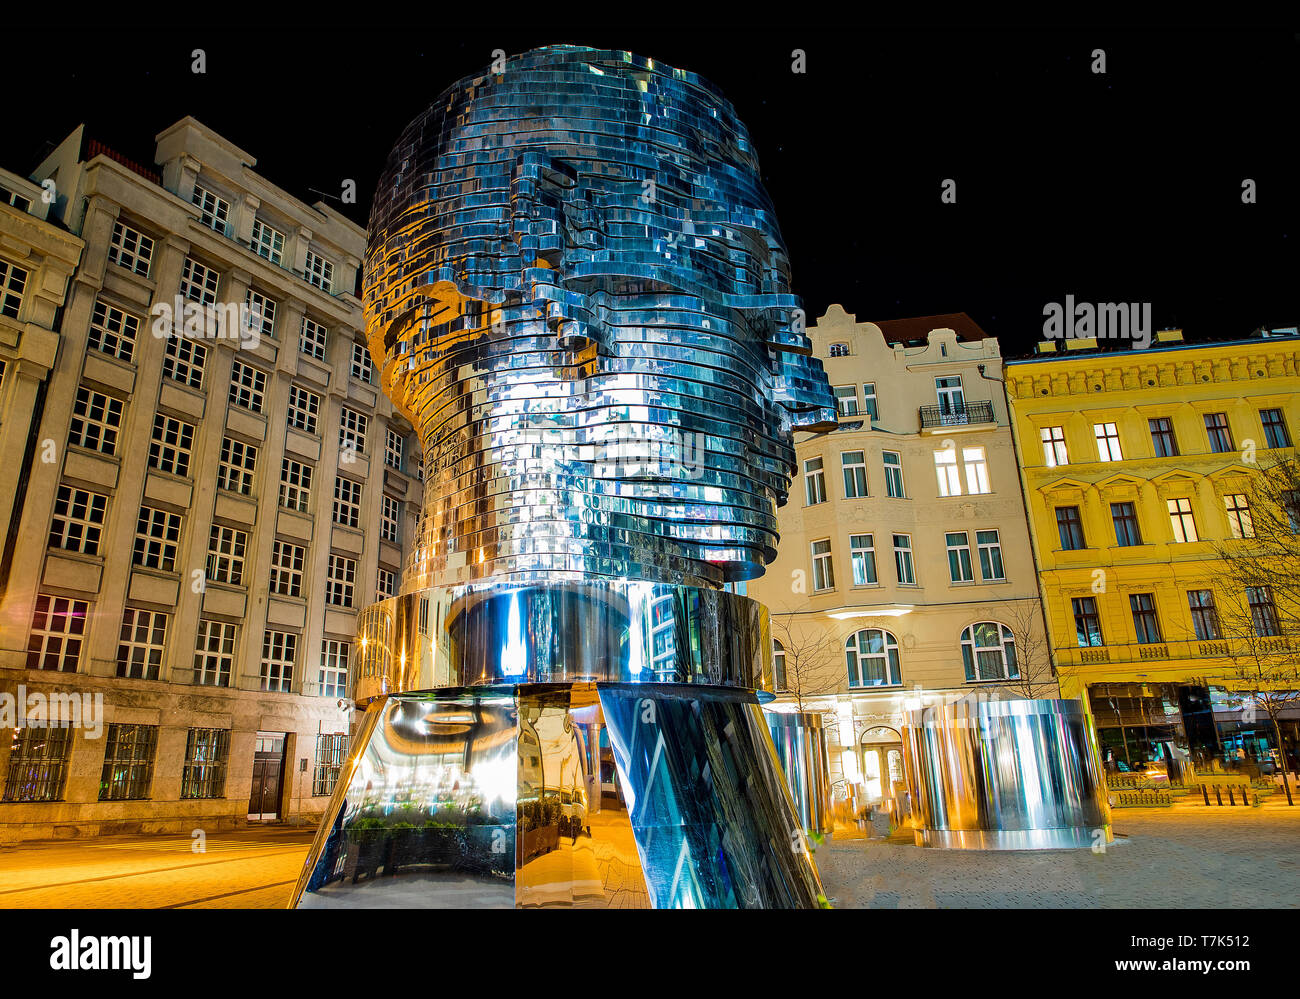 Prague, Czech Republic, April 4, 2019. Metalmorphosis Rotating 42-Layer Sculpture of Franz Kafka’s Head by David Cerny at the evening with electrical  Stock Photo